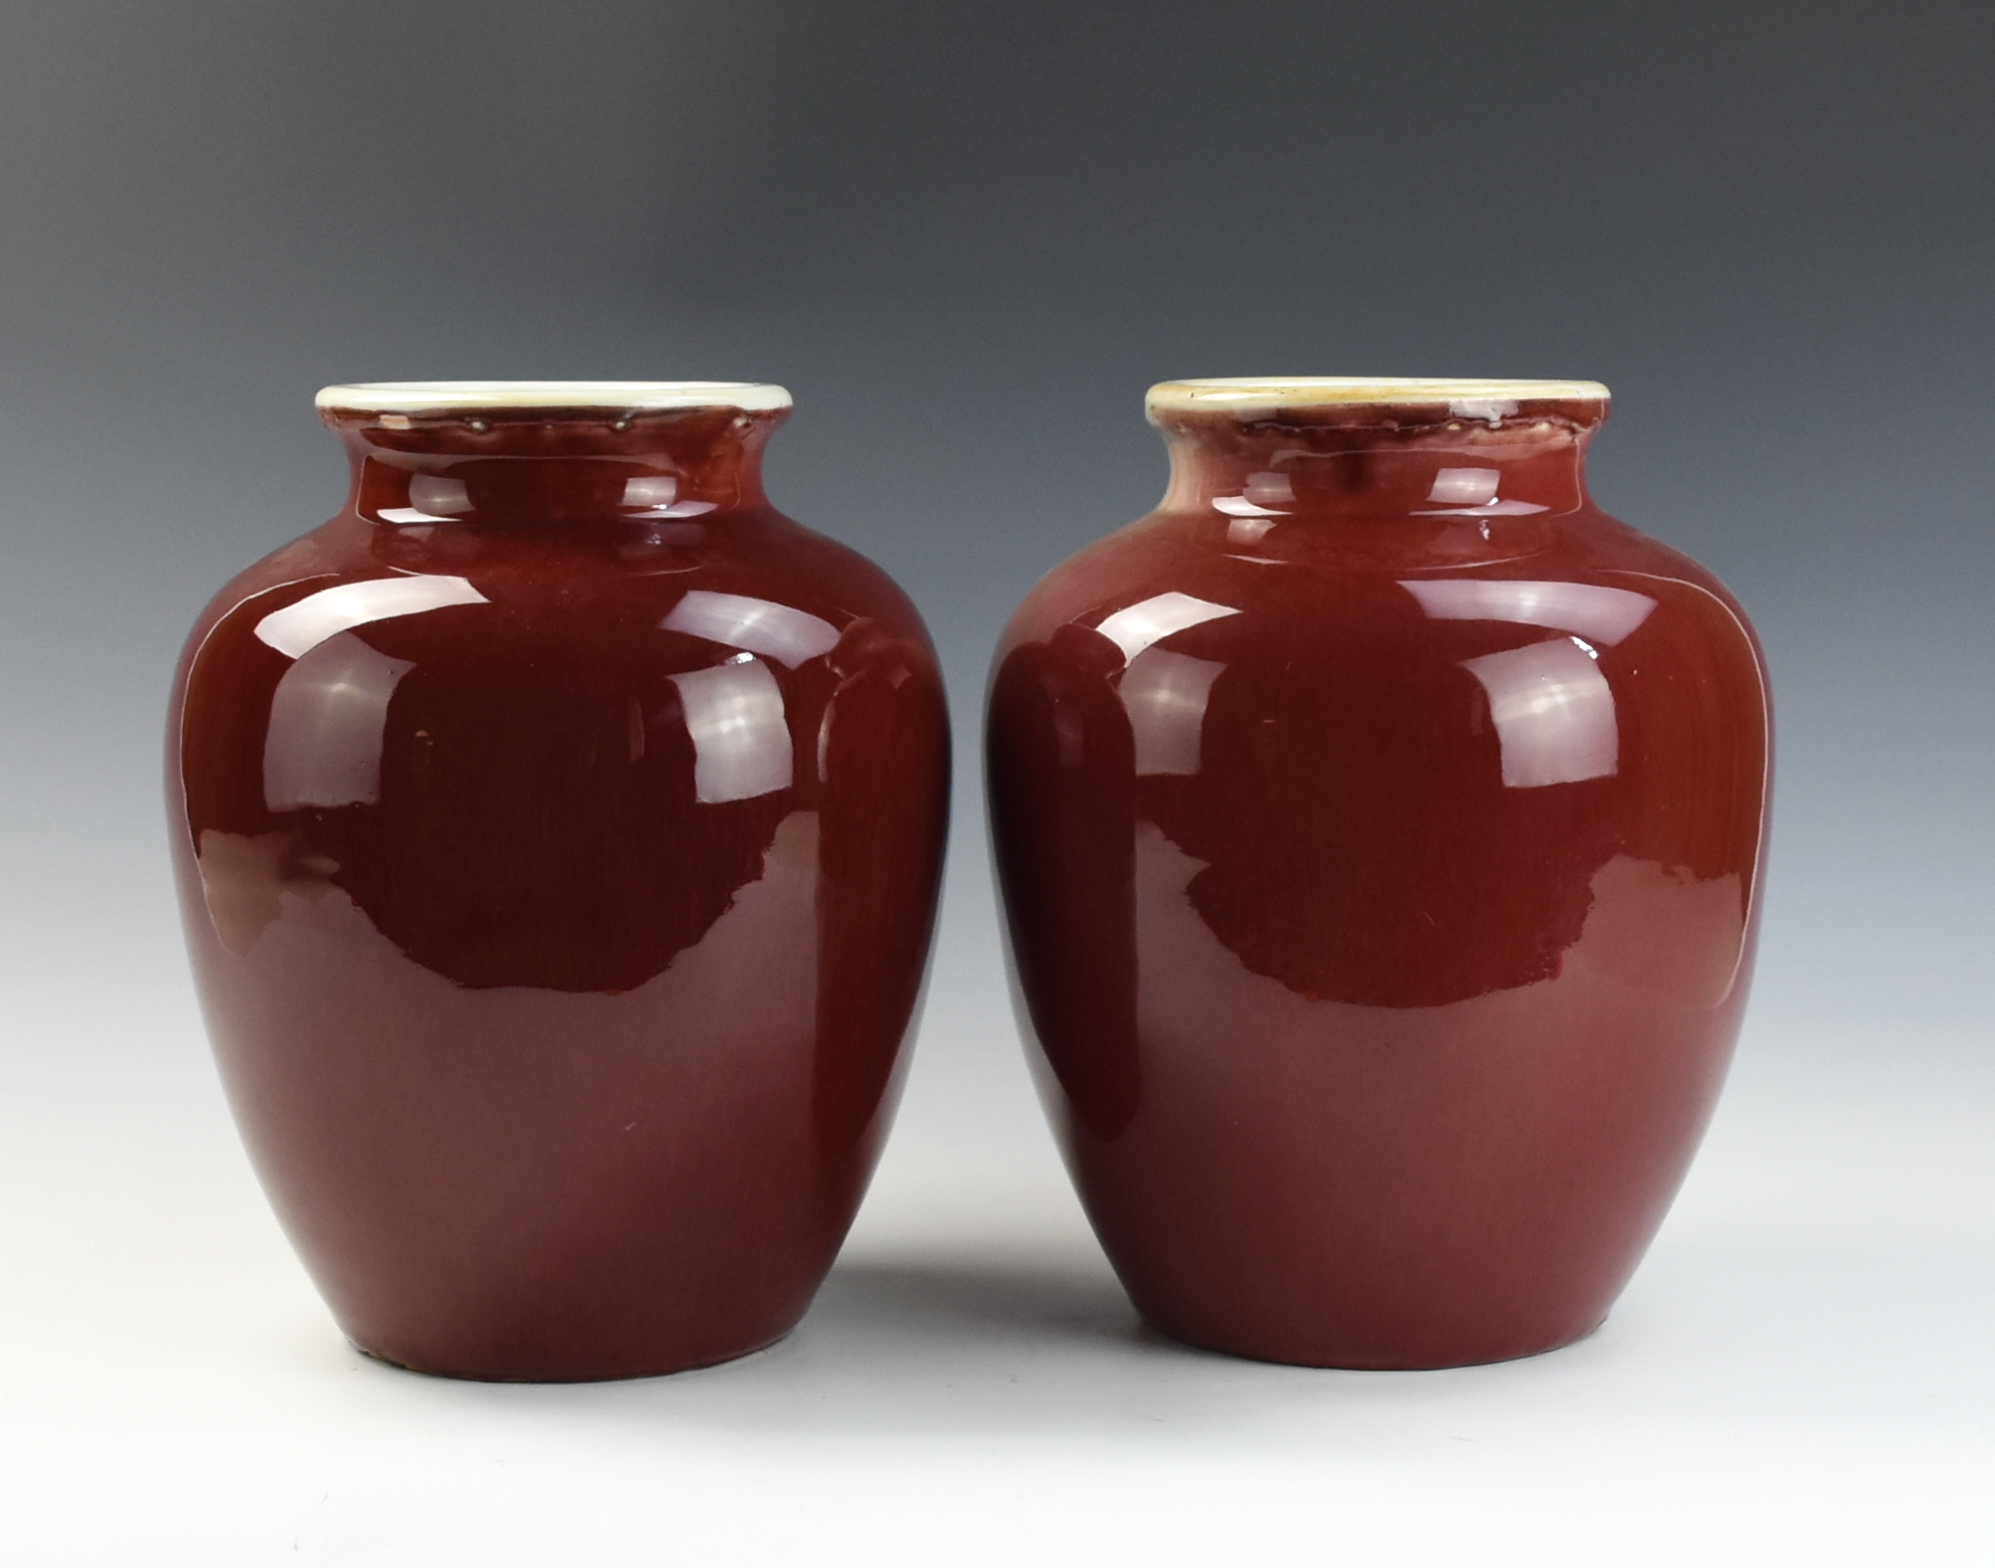 PAIR OF CHINESE COPPER RED GLAZED 2ced14